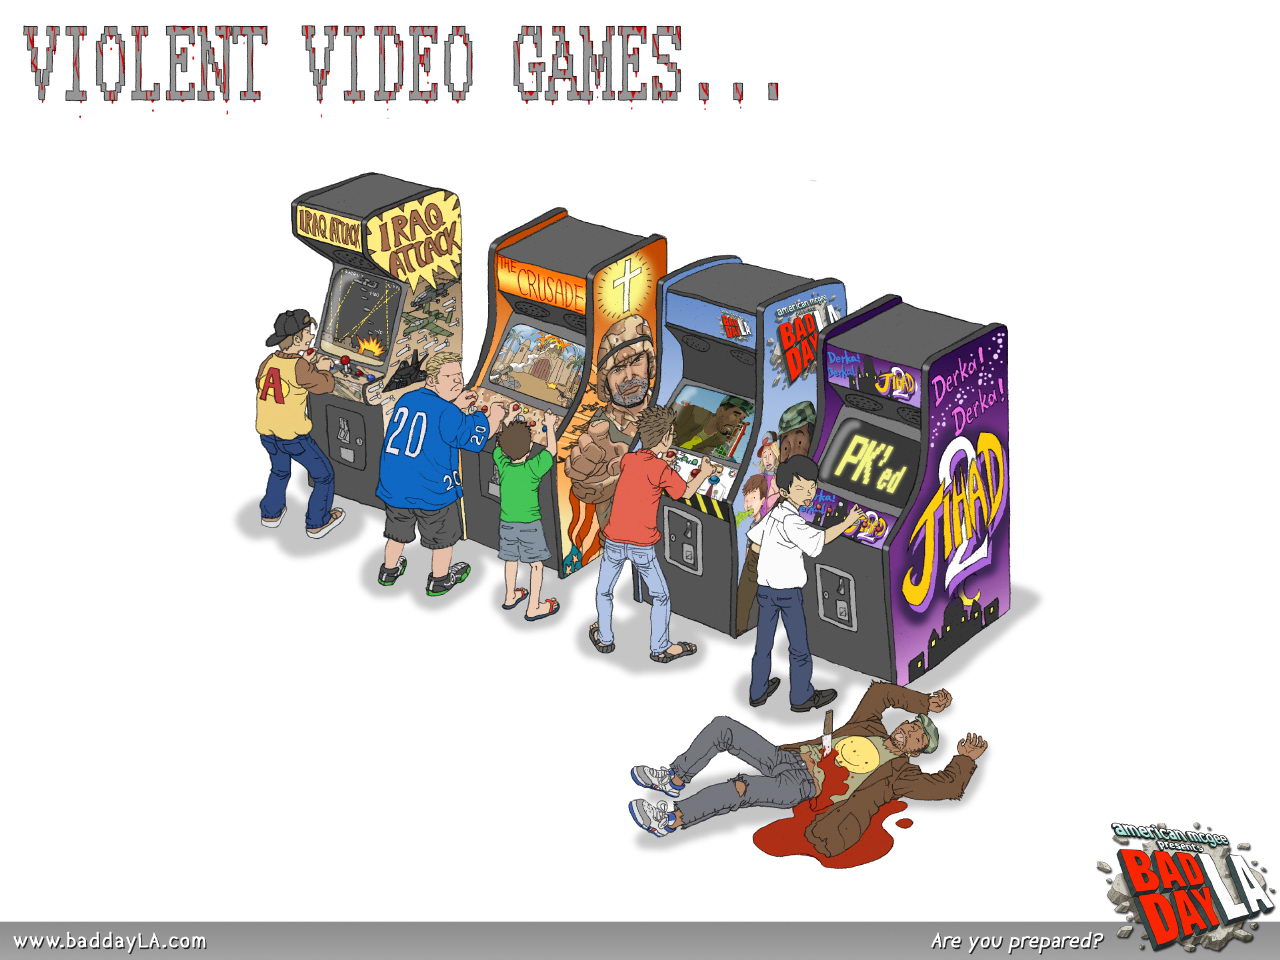 English 102: Composition II | Do Video Games Lead To Real Violence?